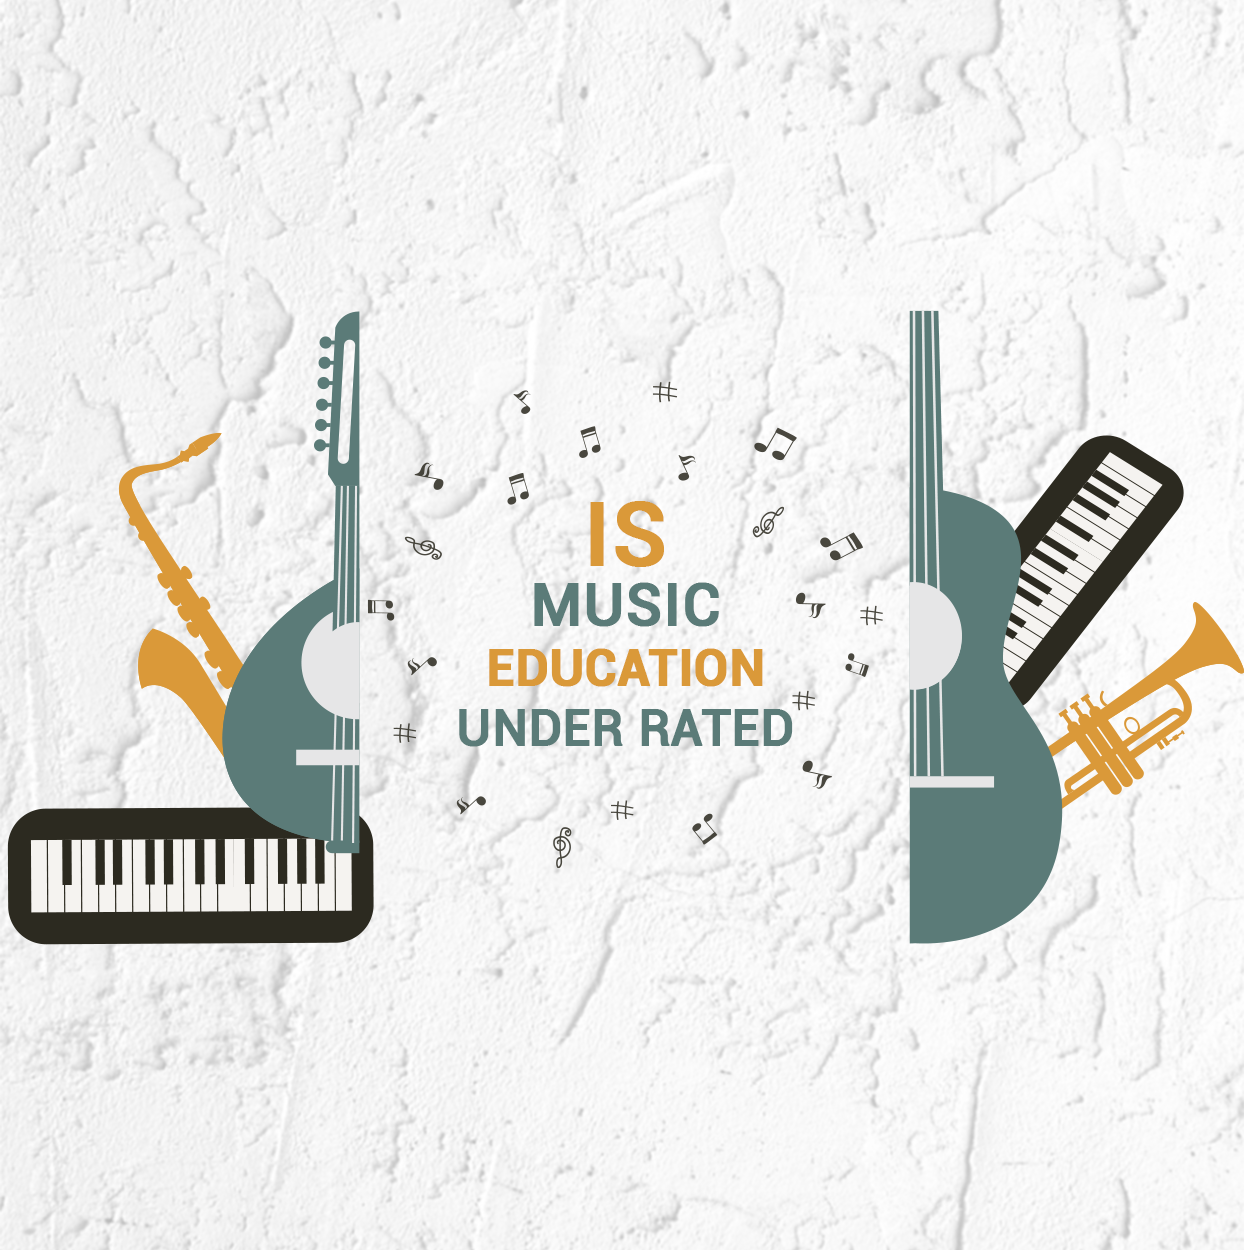 IS MUSIC EDUCATION UNDER RATED?